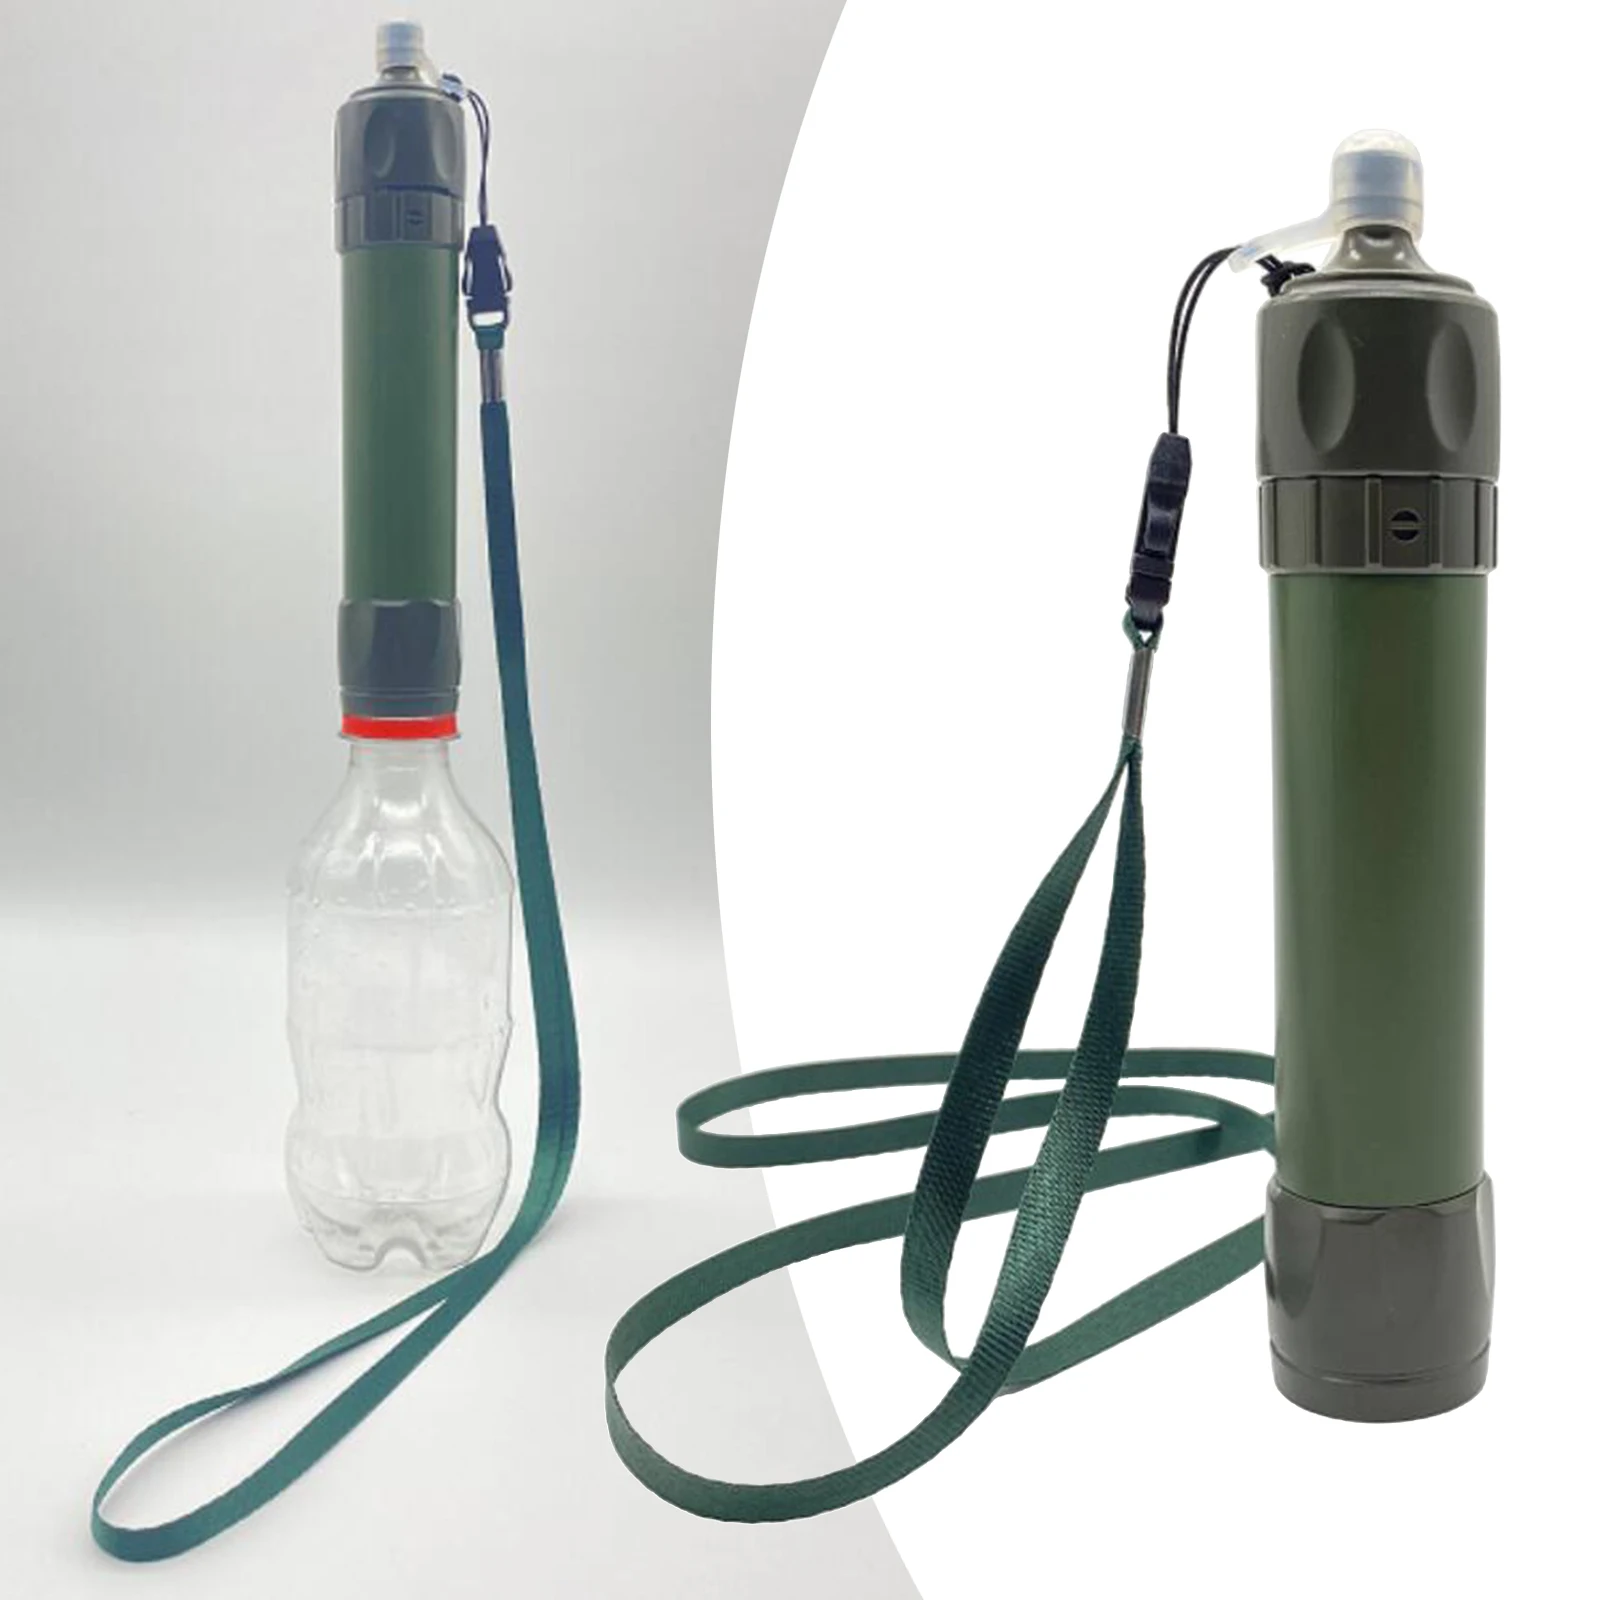 Outdoor Water Filter Straw Water Purifier System with 1000 Liters Filtration Capacity for Camping Emergency Survival Tool